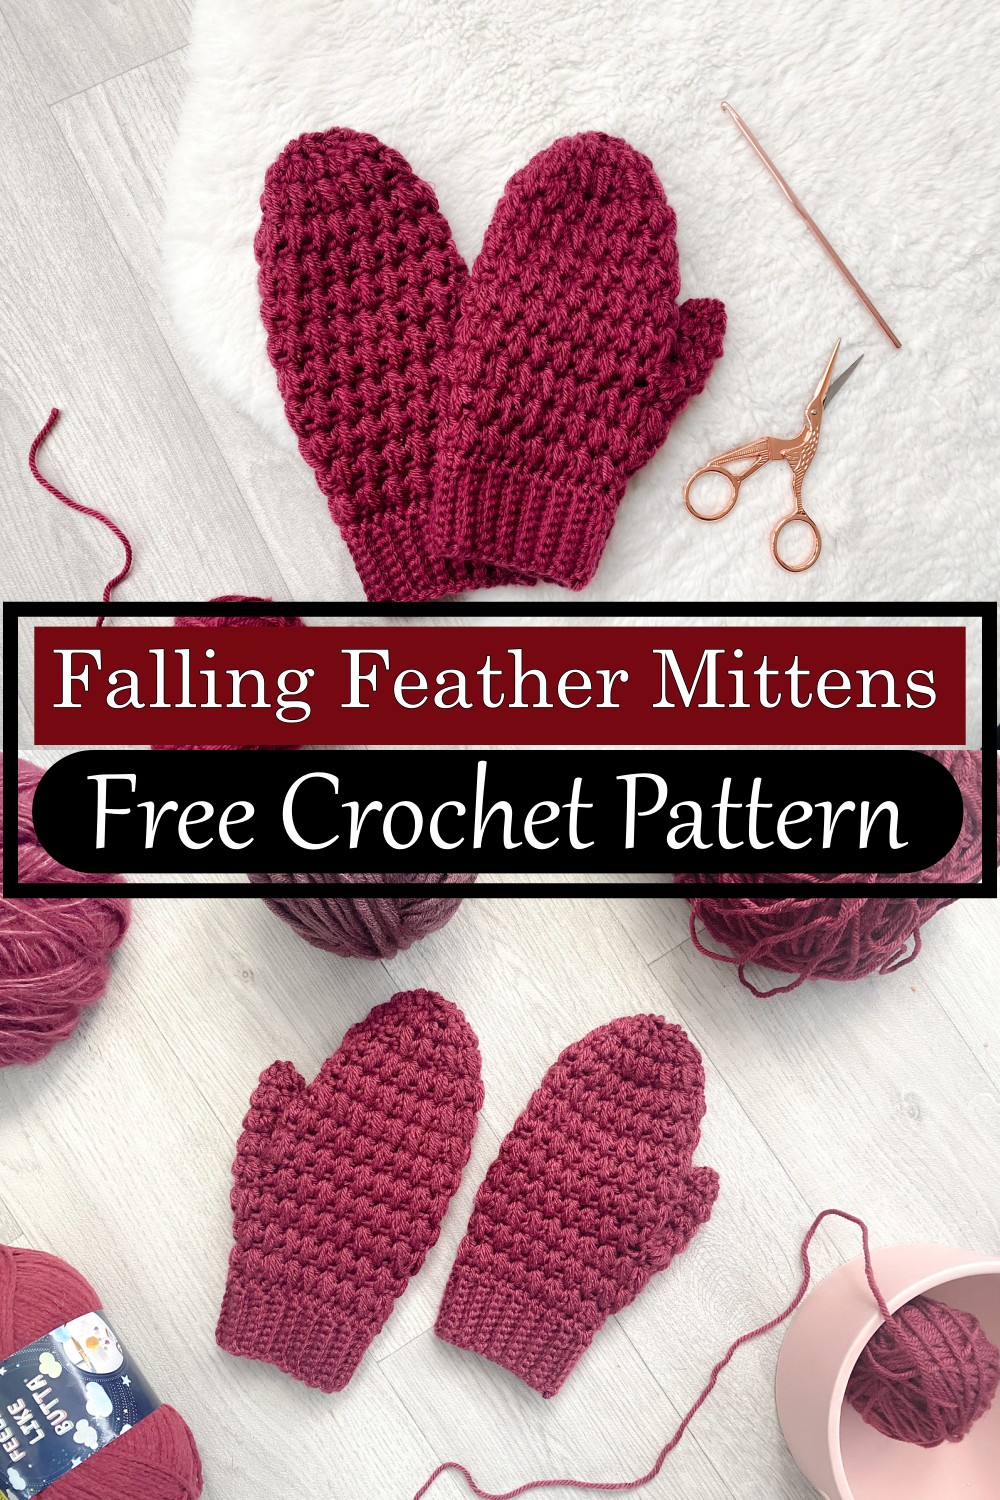 Falling Feather Mittens